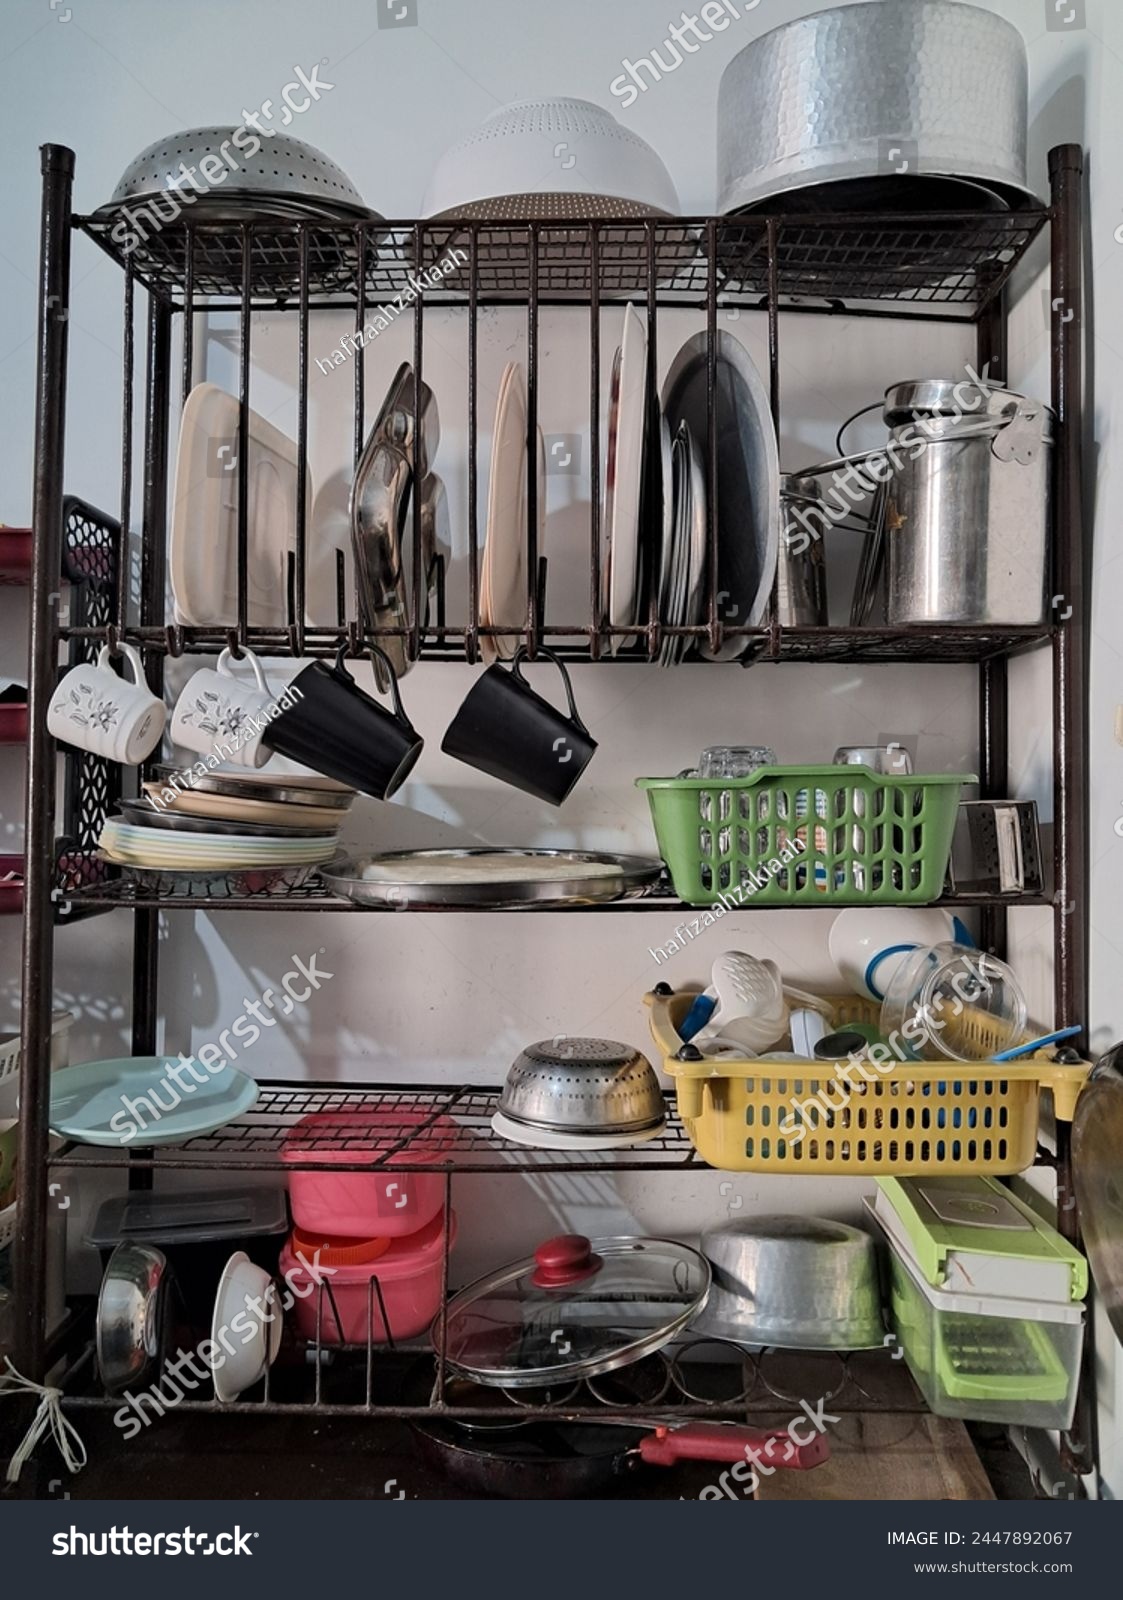 Arrangement of plates on an iron plate rack typical of a traditional Indian kitchen  #2447892067